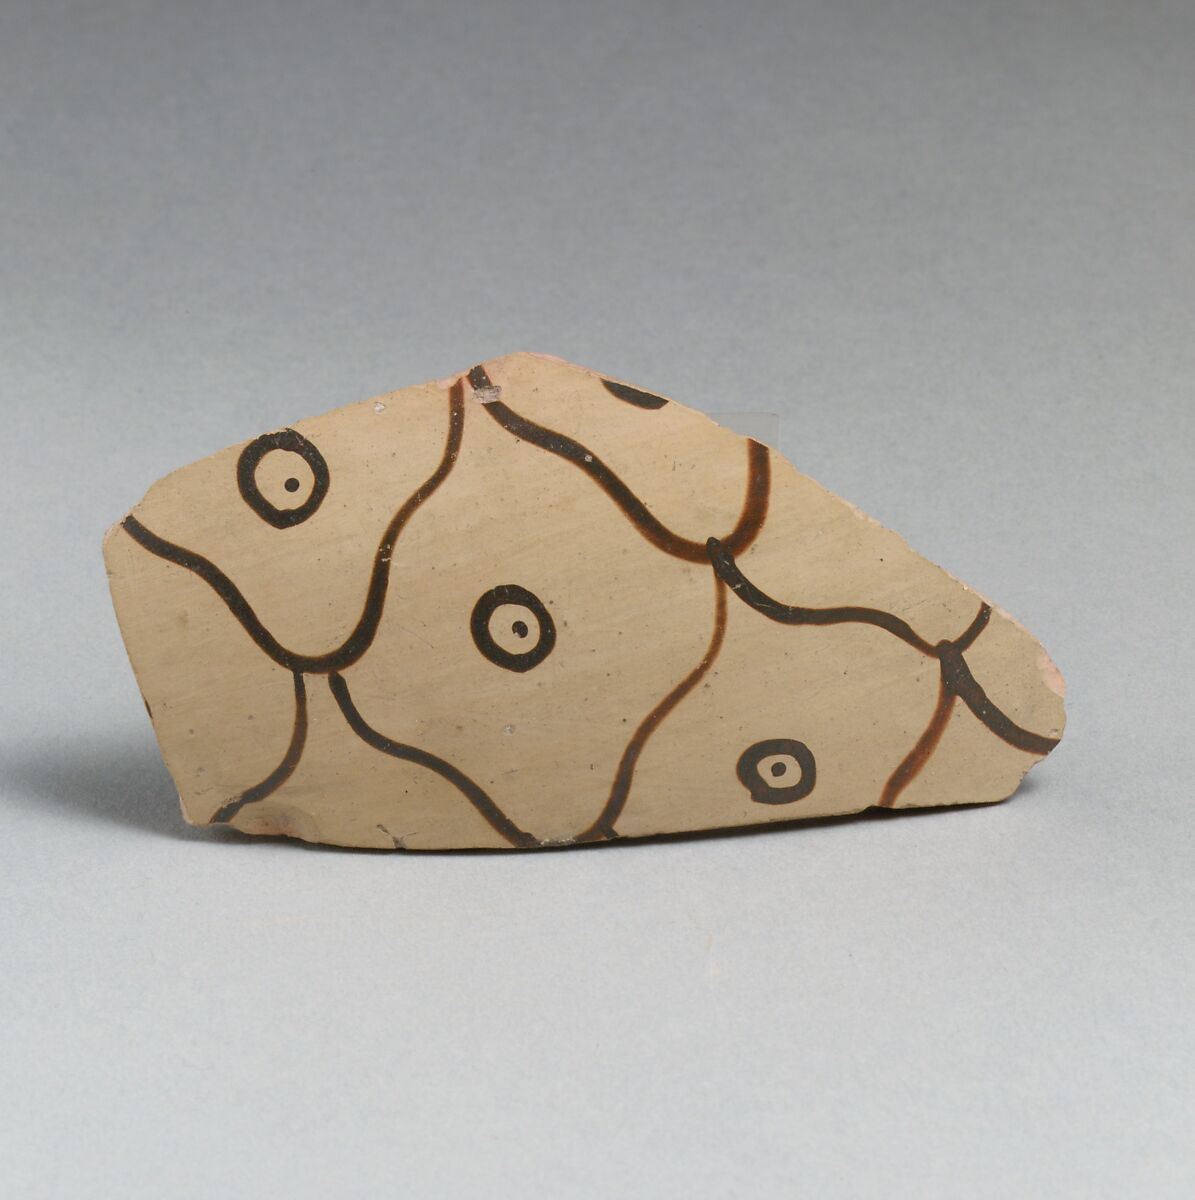 Terracotta vessel fragment with net pattern and dots within circles, Terracotta, Mycenaean 